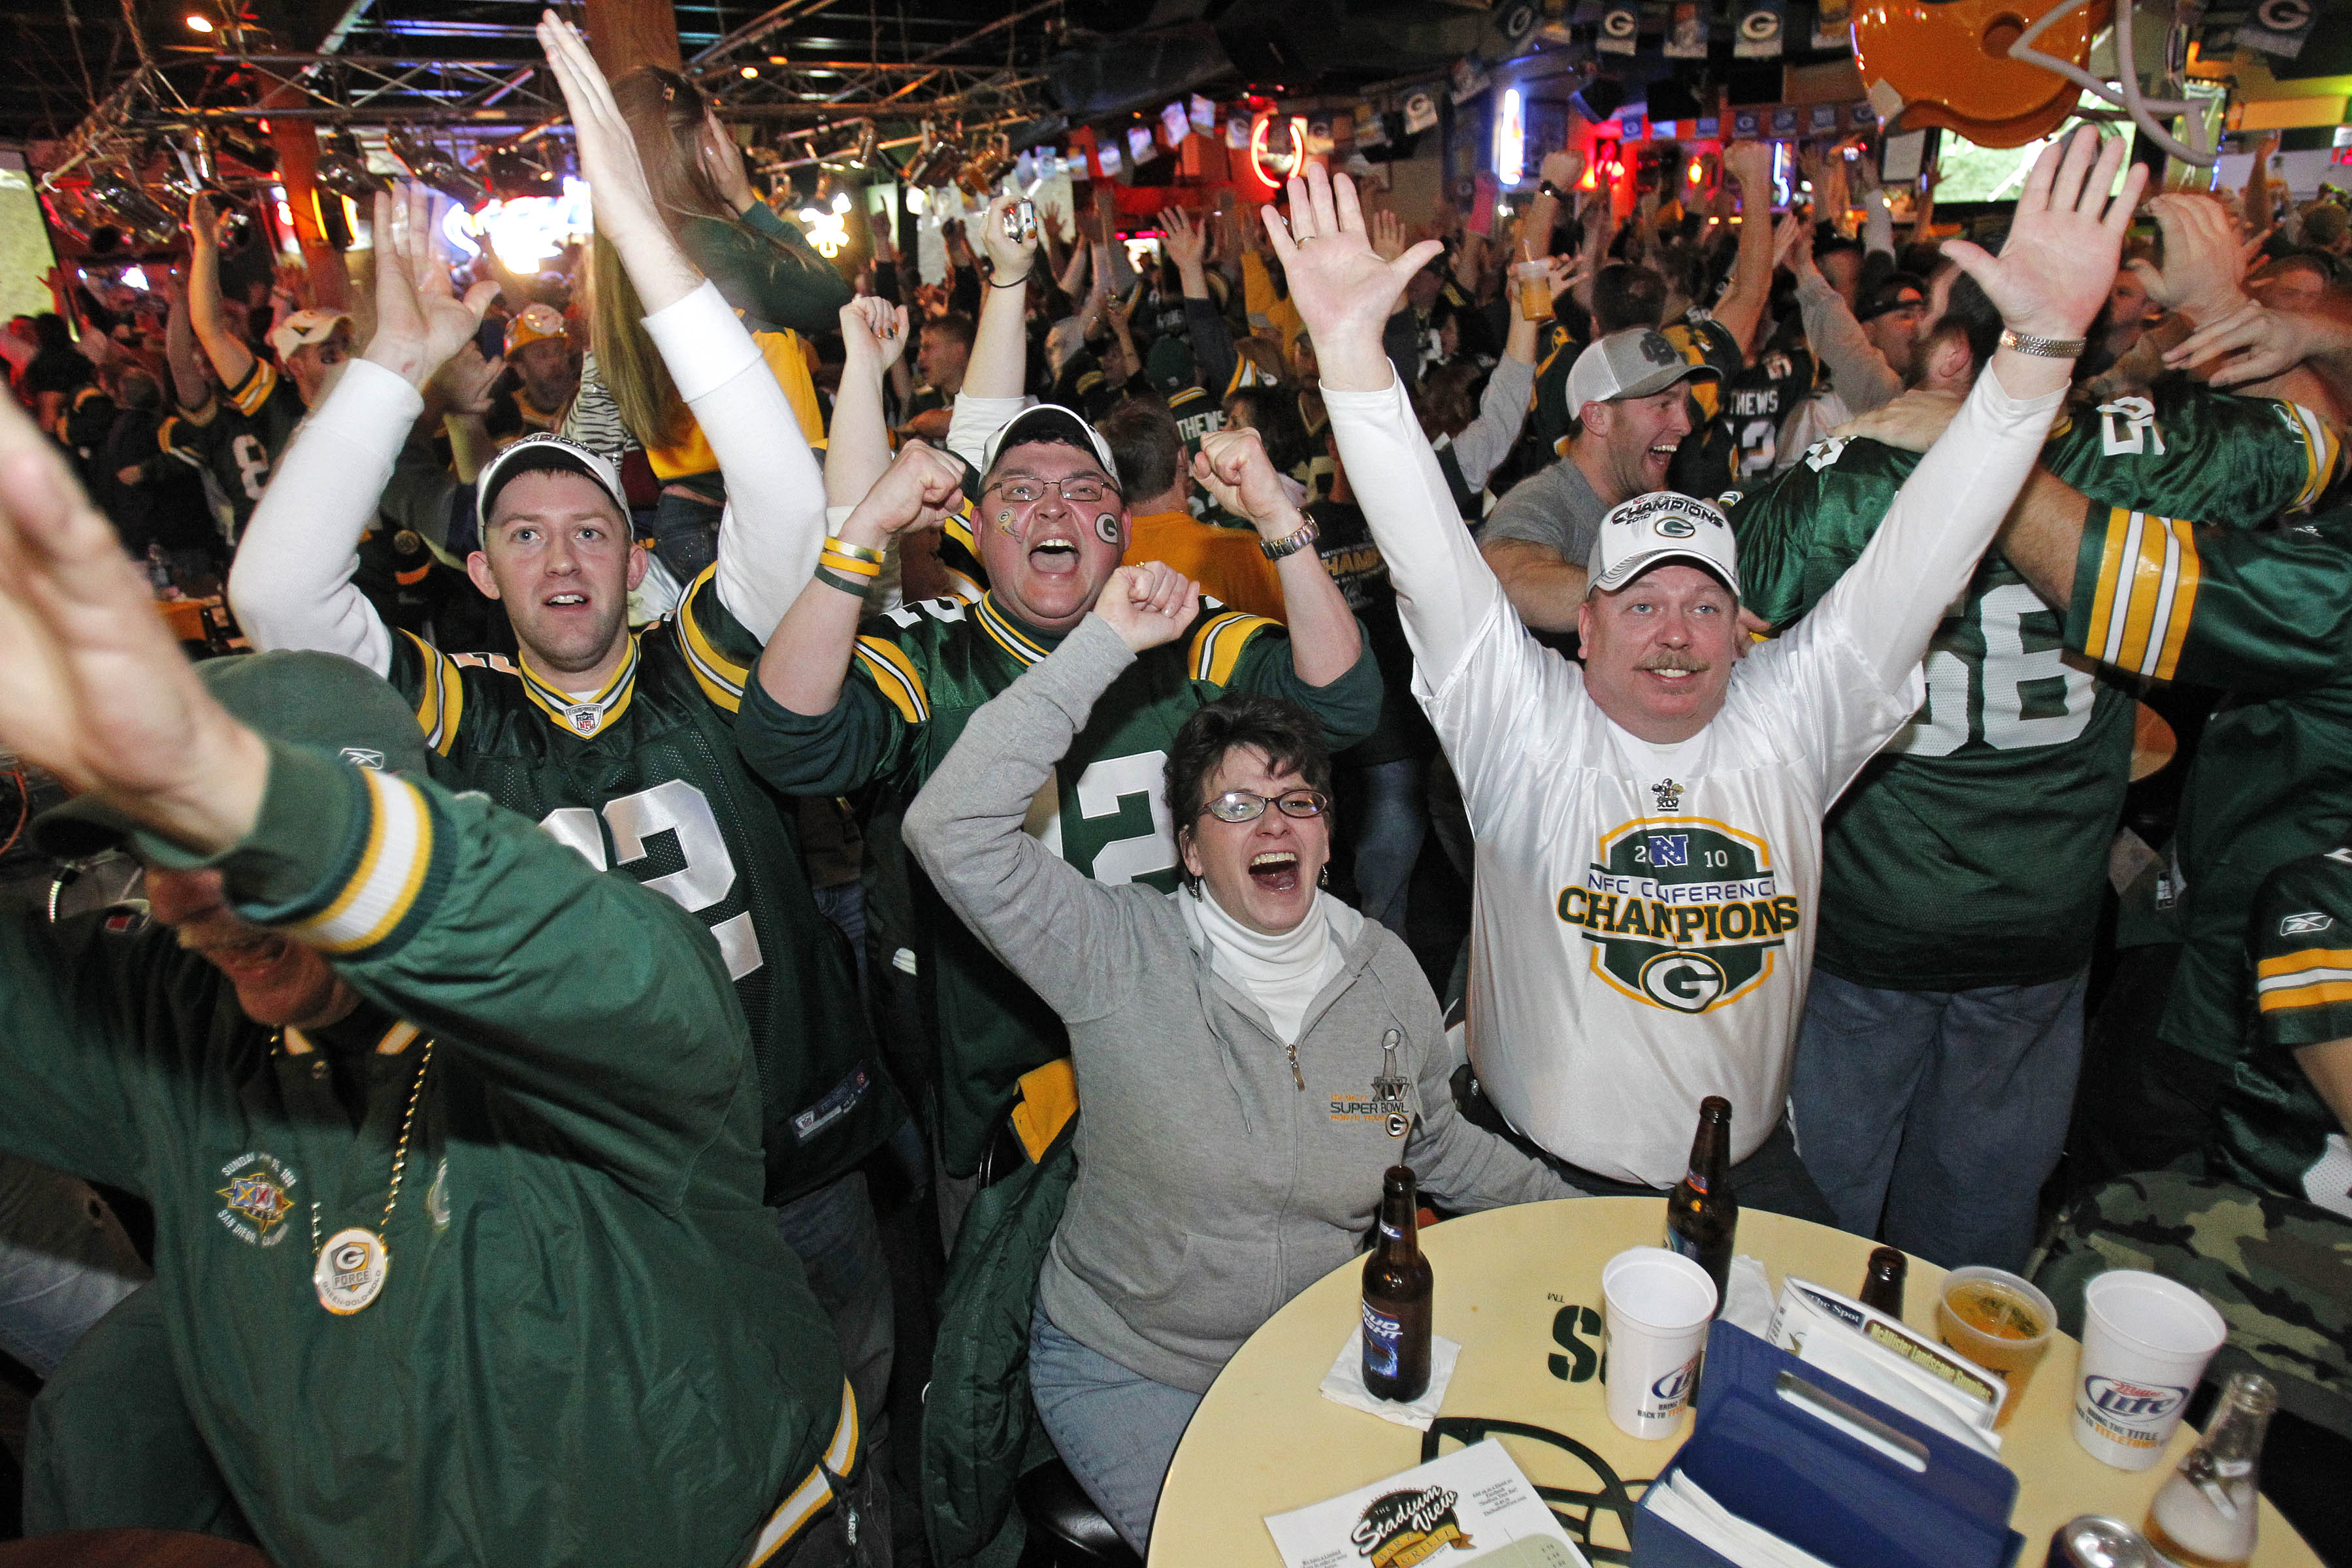 GREEN BAY, WI - FEBRUARY 06: Green Bay Packers fans react after watching the Green Bay Packers defeat the Pittsburgh Steelers in the Super Bowl at Stadium View Bar February 6, 2011 in Green Bay, Wisconsin.  (Photo by Matt Ludtke/Getty Images)